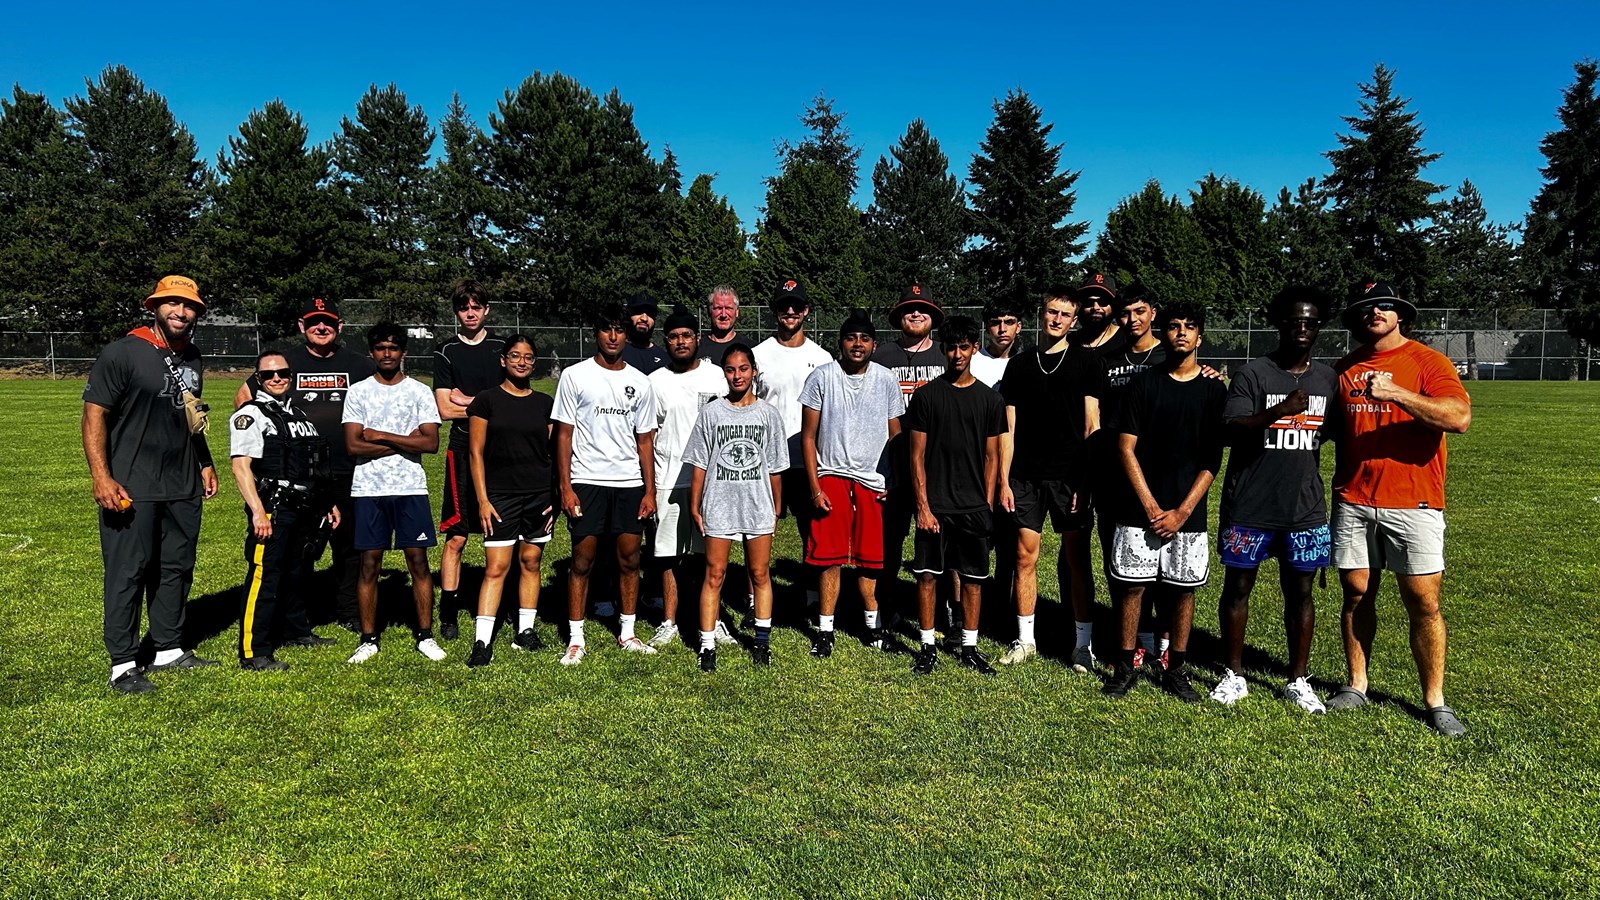 Lions Pride teaches Surrey students drills and skills for life on and off the football field